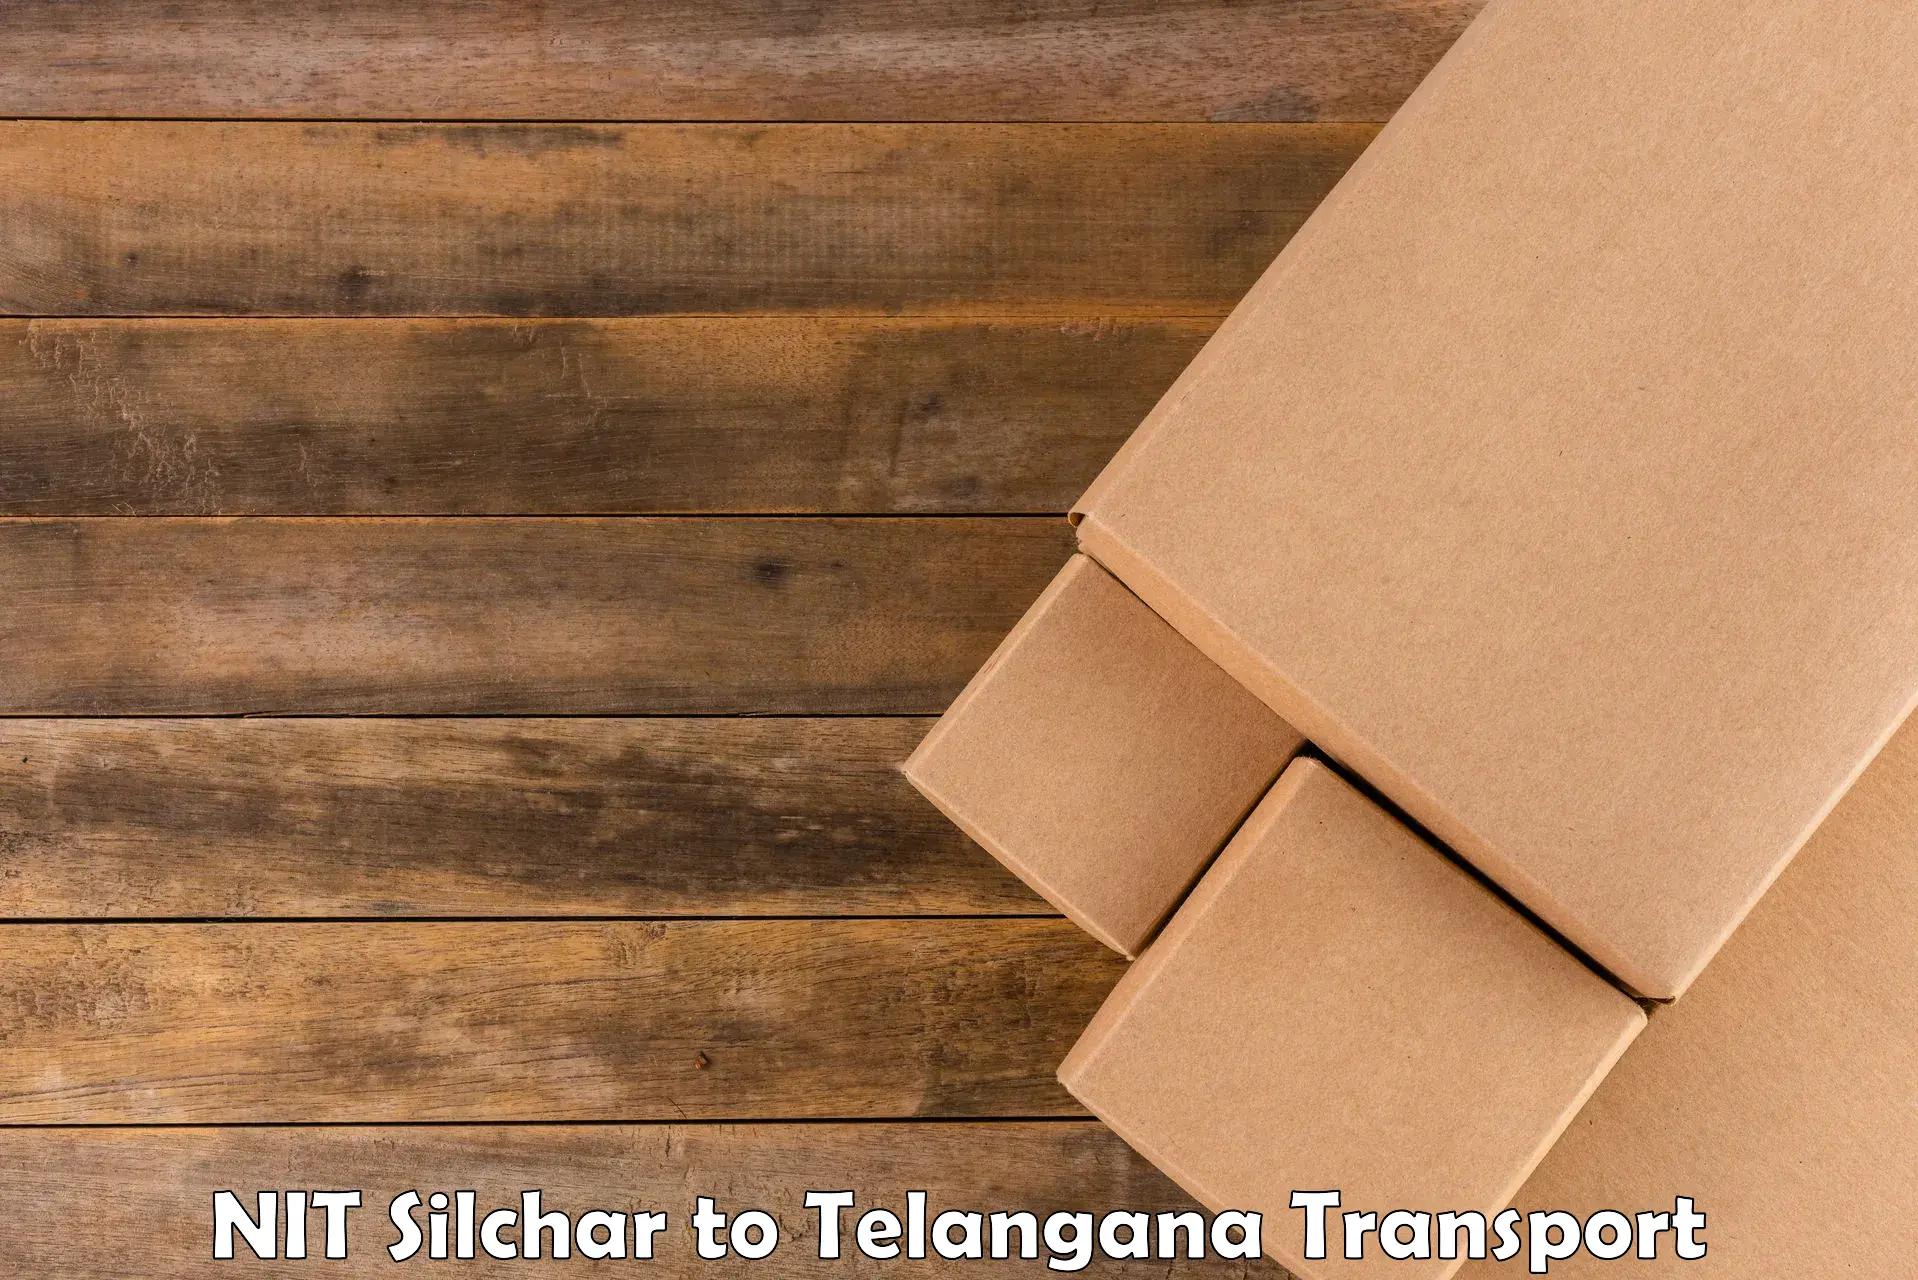 Commercial transport service NIT Silchar to Suryapet